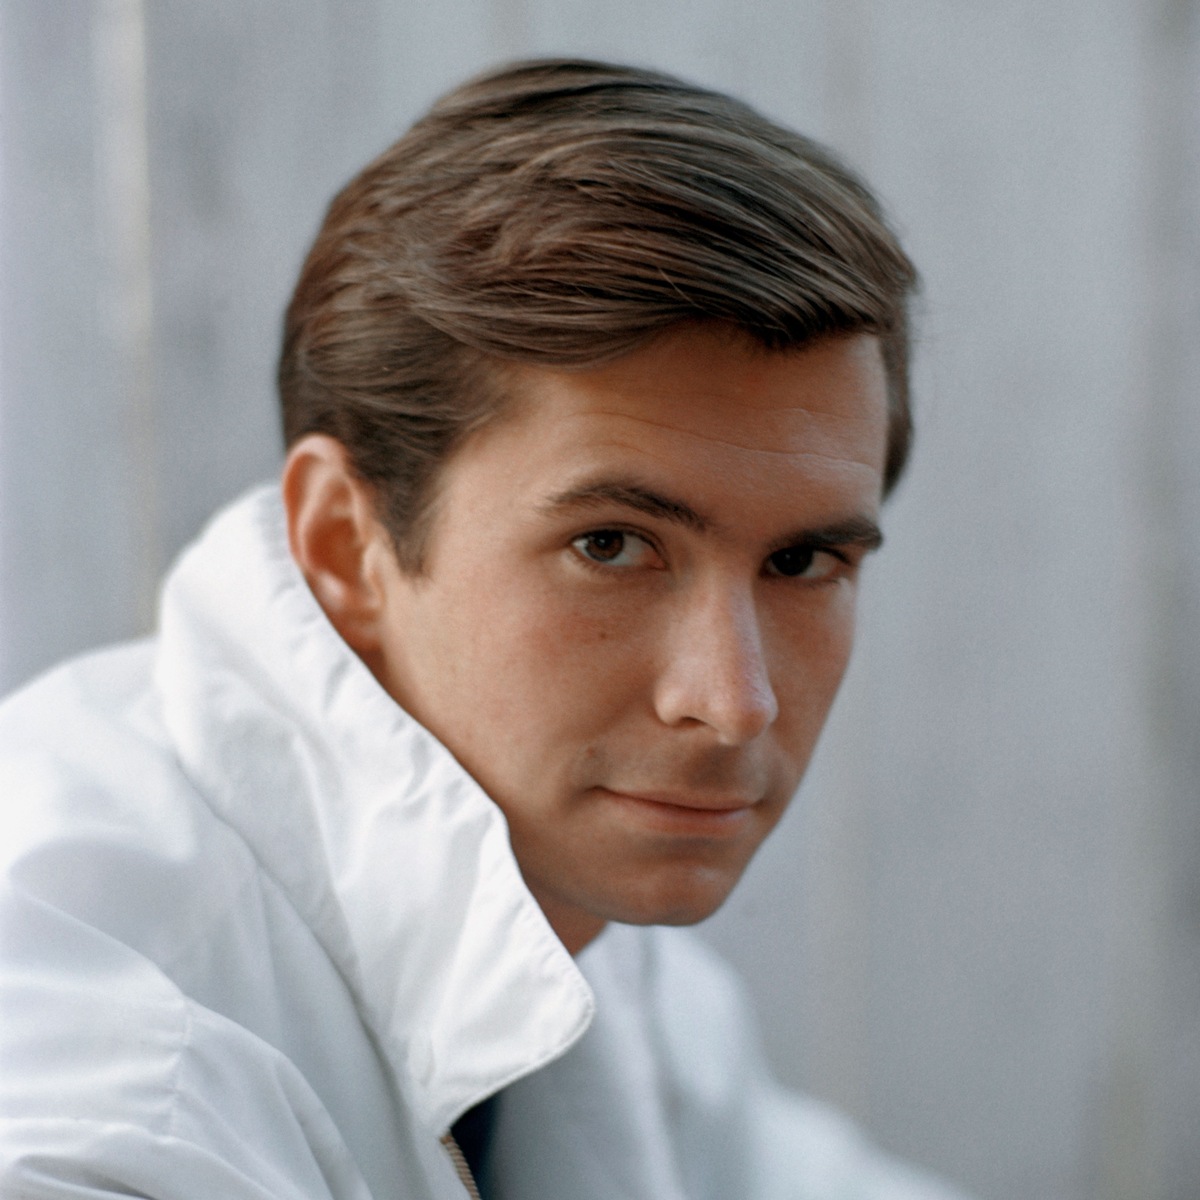 11 Extraordinary Facts About Anthony Perkins - Facts.net